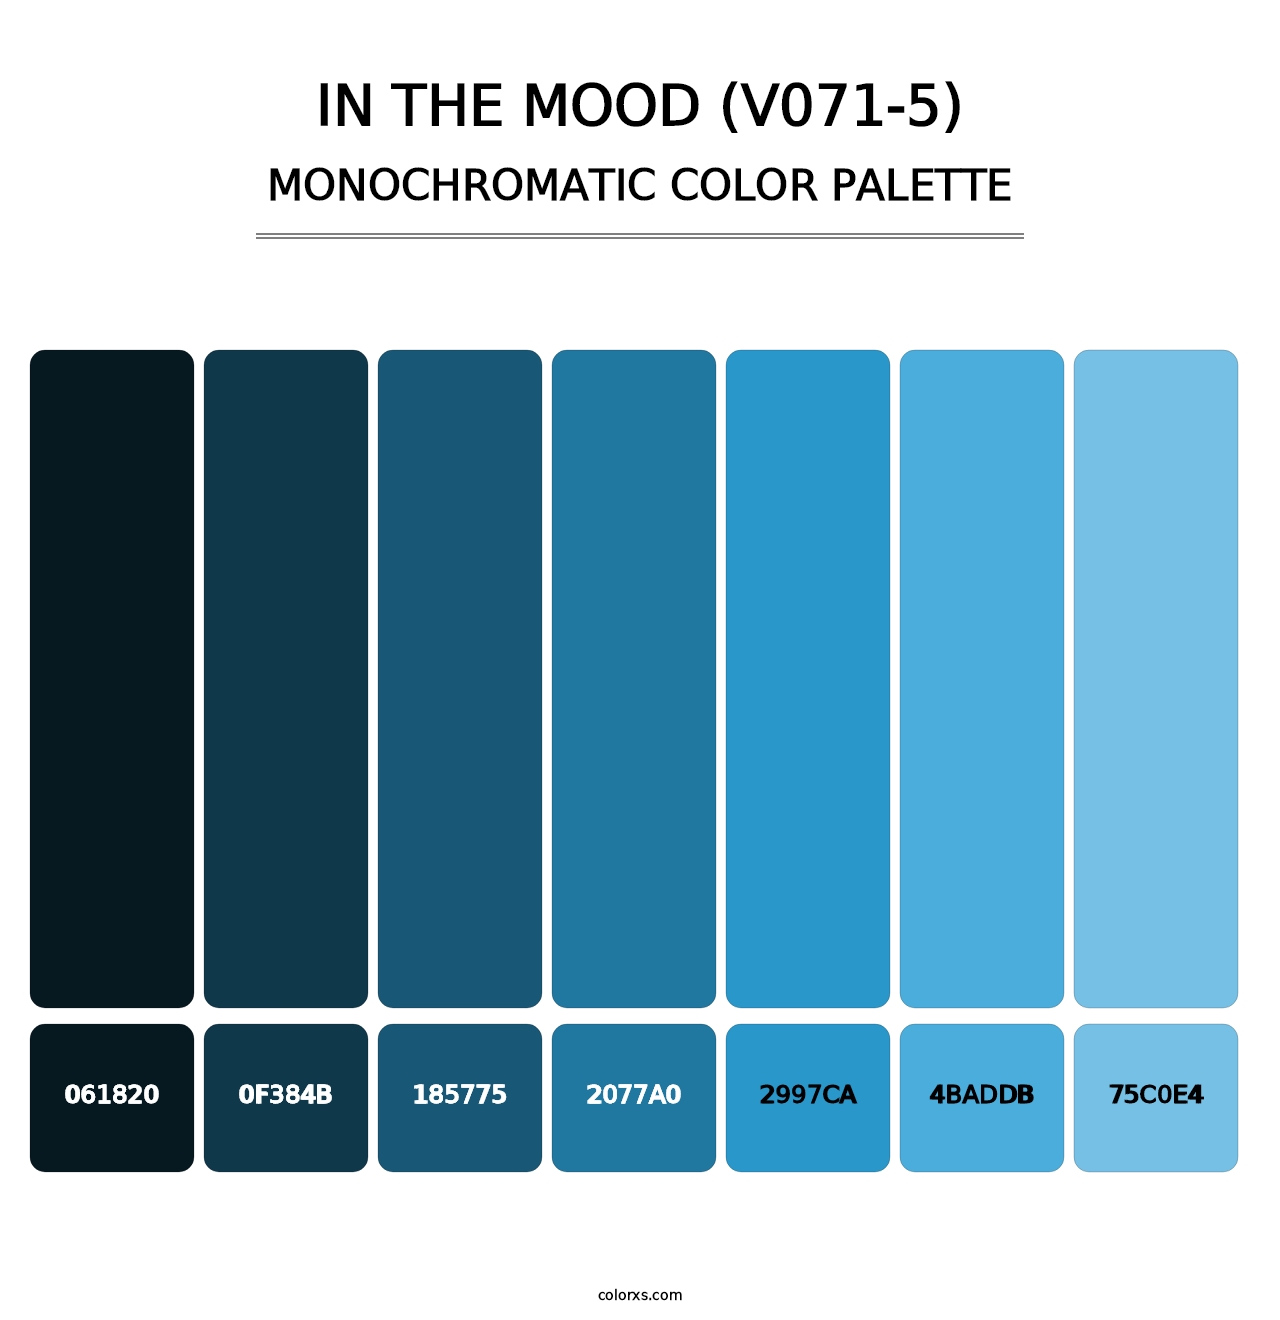 In the Mood (V071-5) - Monochromatic Color Palette